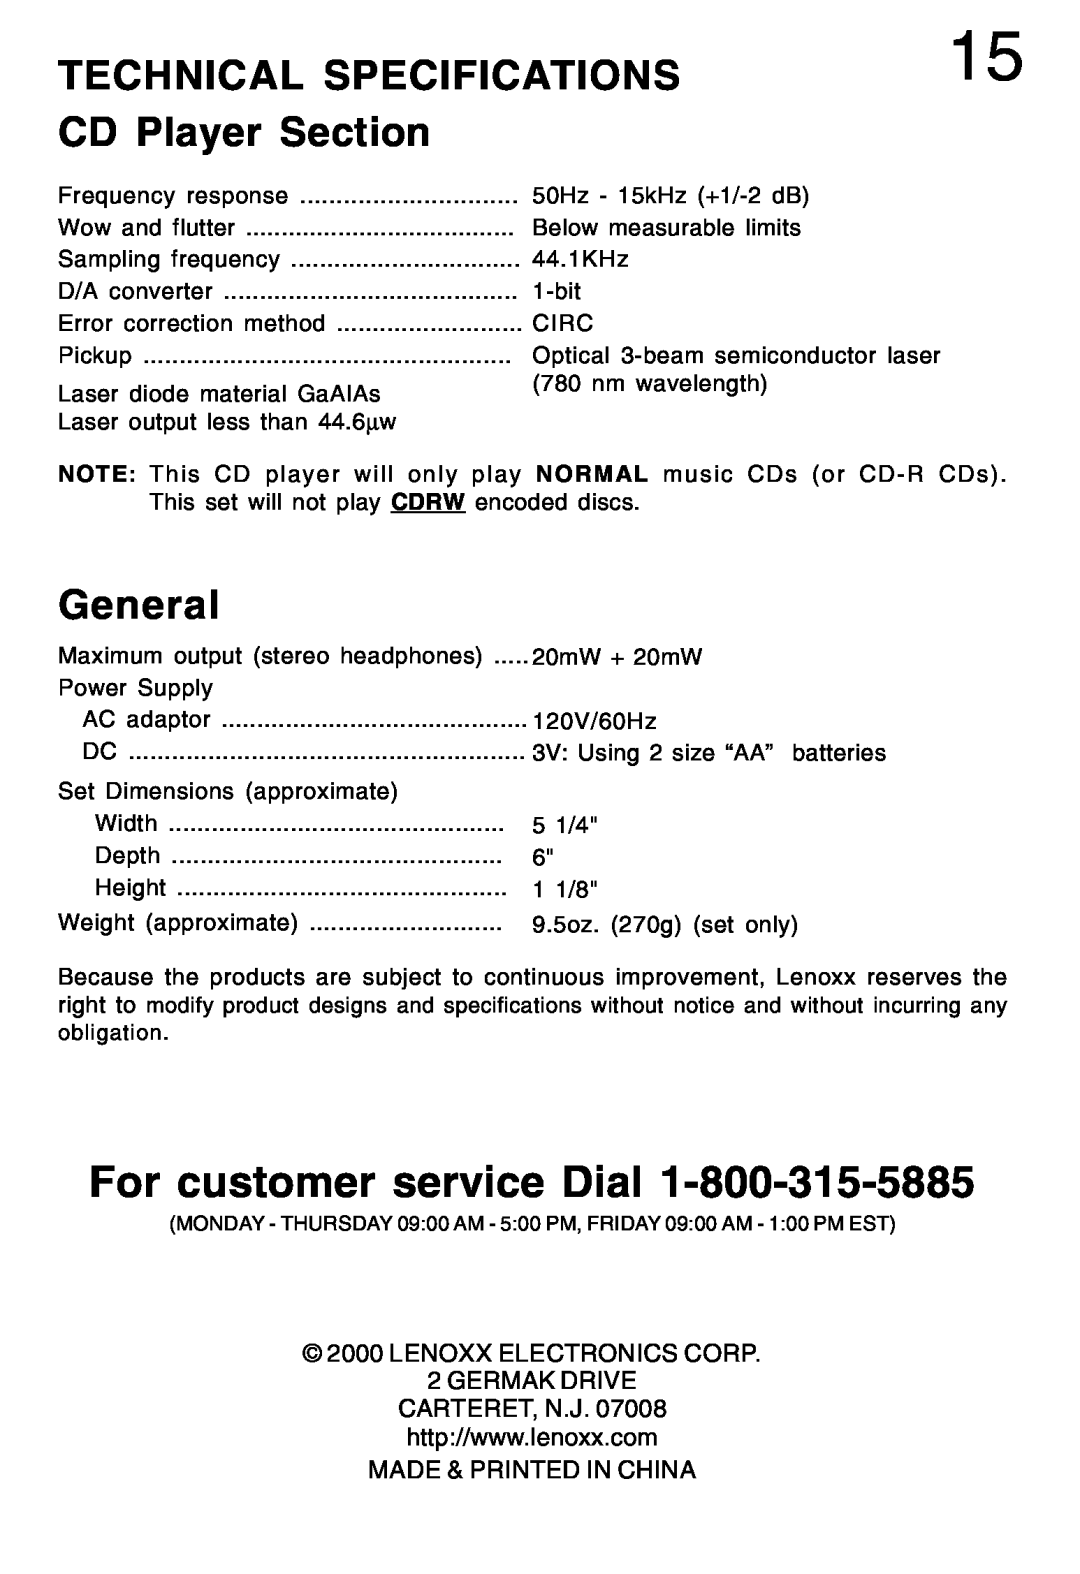 Lenoxx Electronics CD-79 Technical Specifications, CD Player Section, General, For customer service Dial 